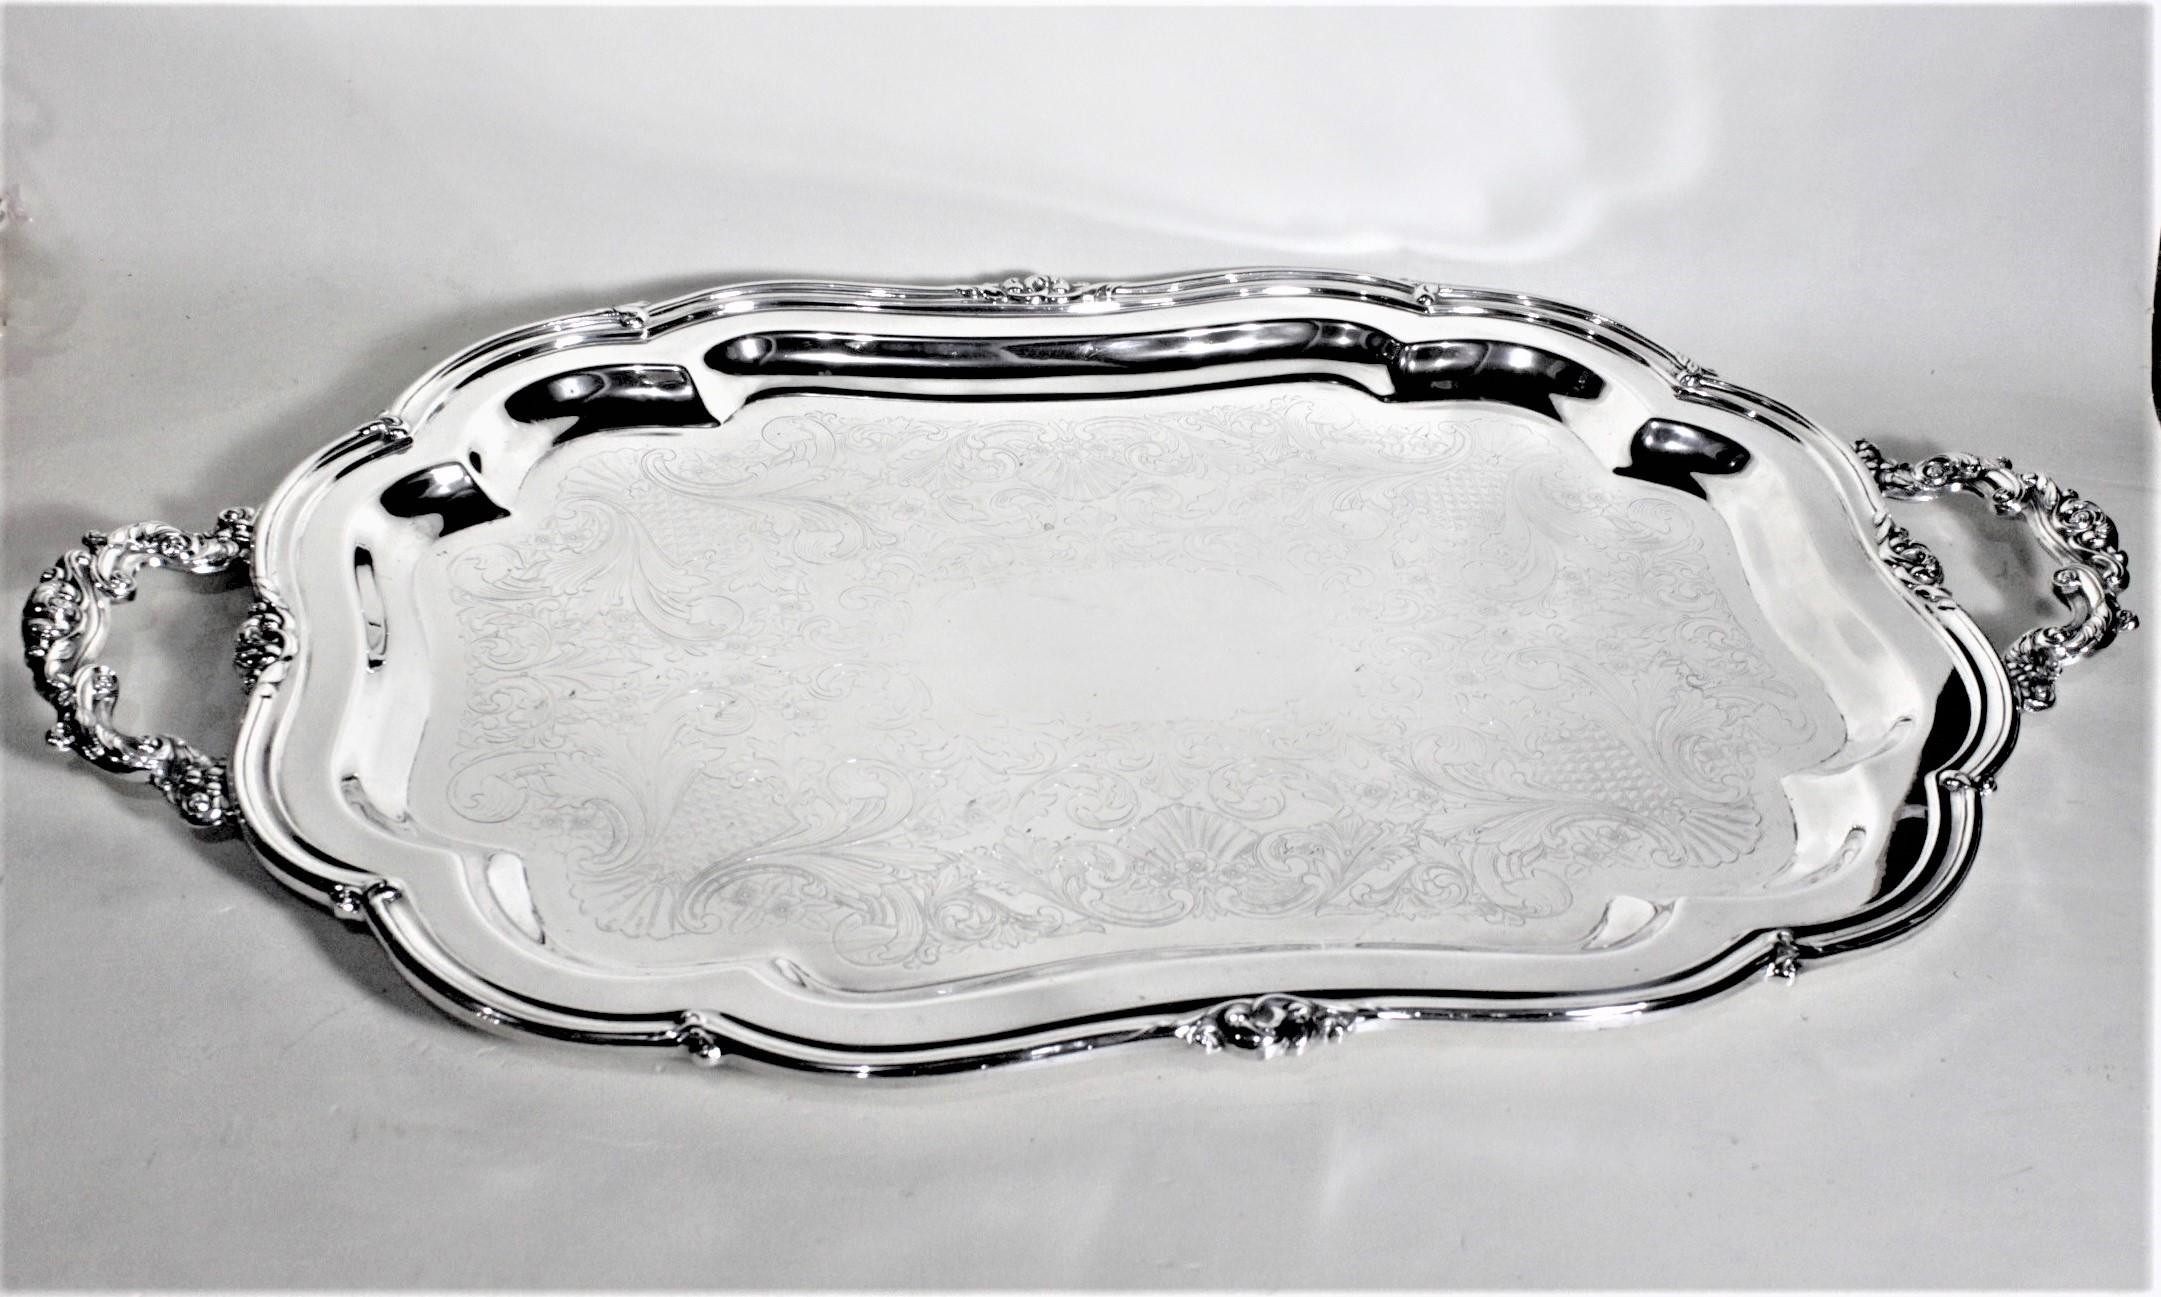 This vintage and very large rectangular silver plated serving tray was made by Community plate of the United States in approximately 1960 in an English Victorian style. The tray has a tiered scalloped rim with accenting decoration on either side,